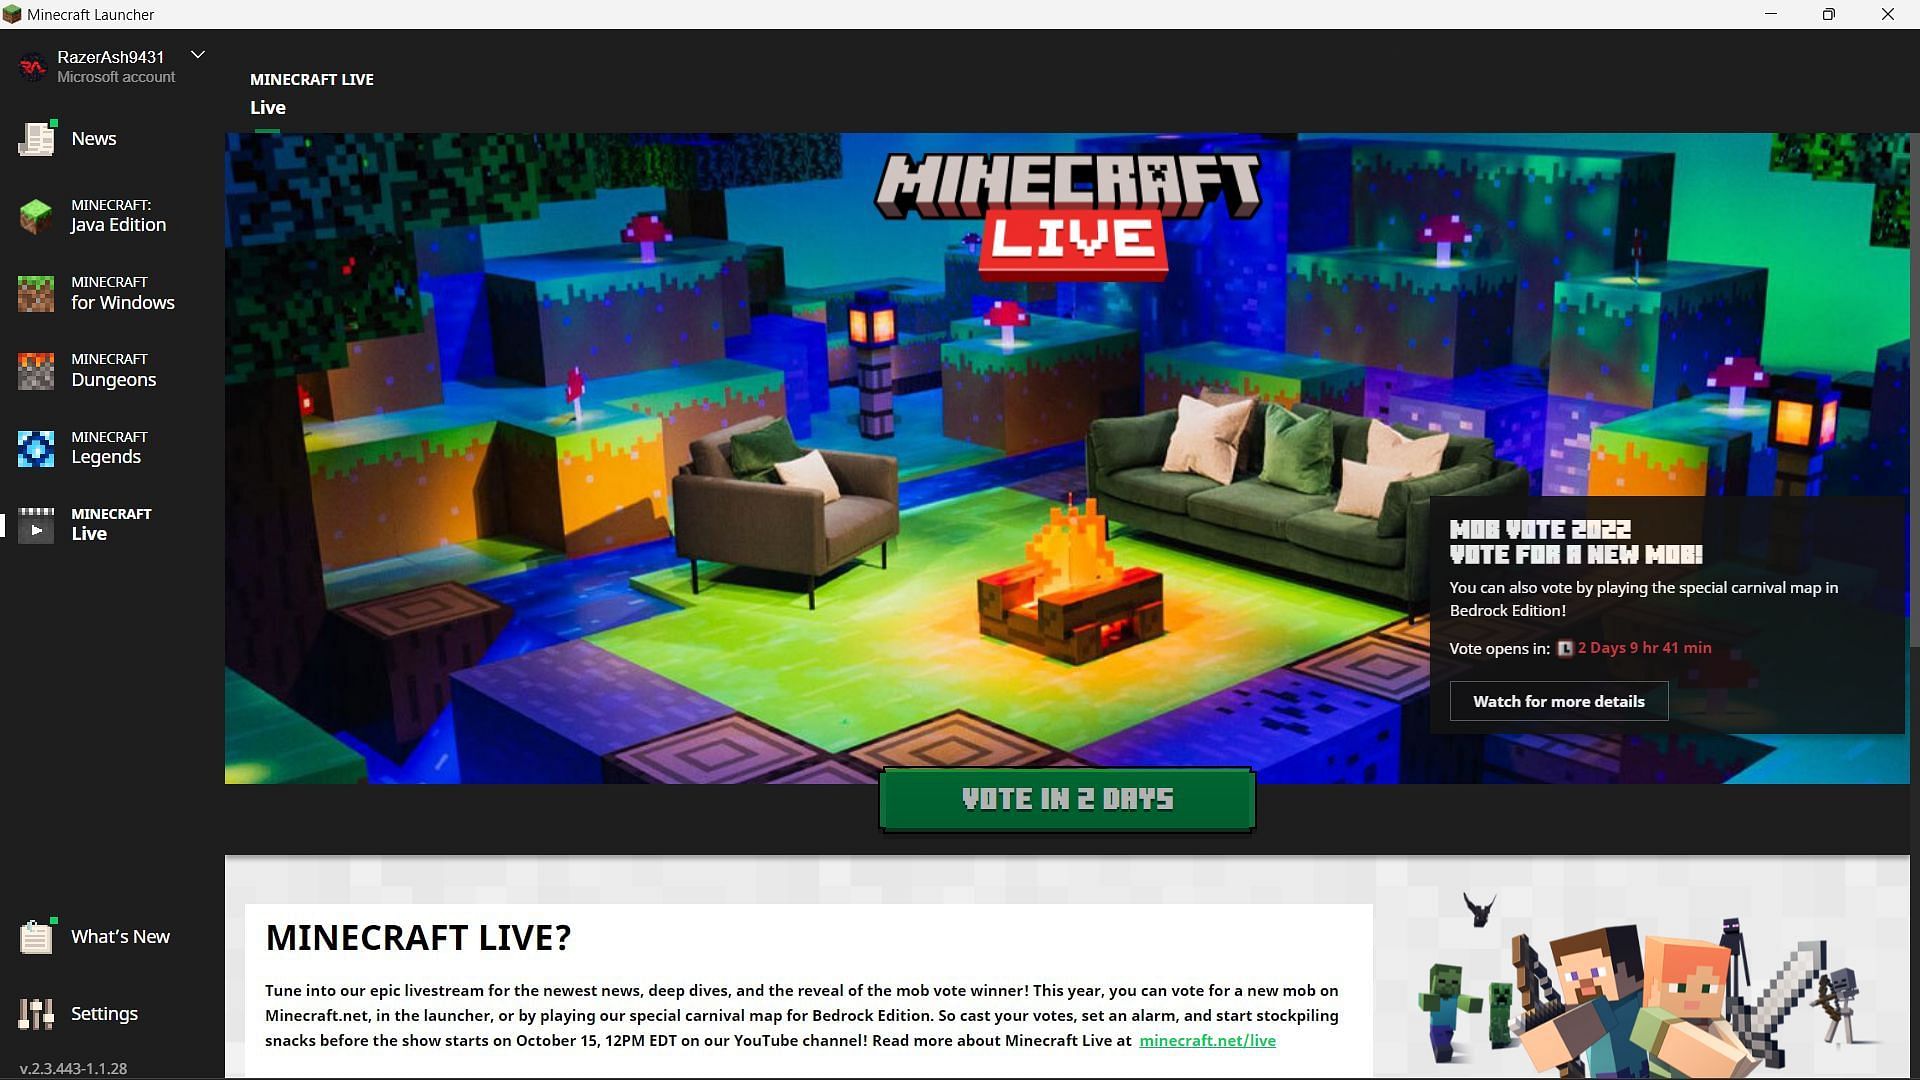 New Minecraft Live tab on the official launcher where players can vote as well (Image via Sportskeeda)